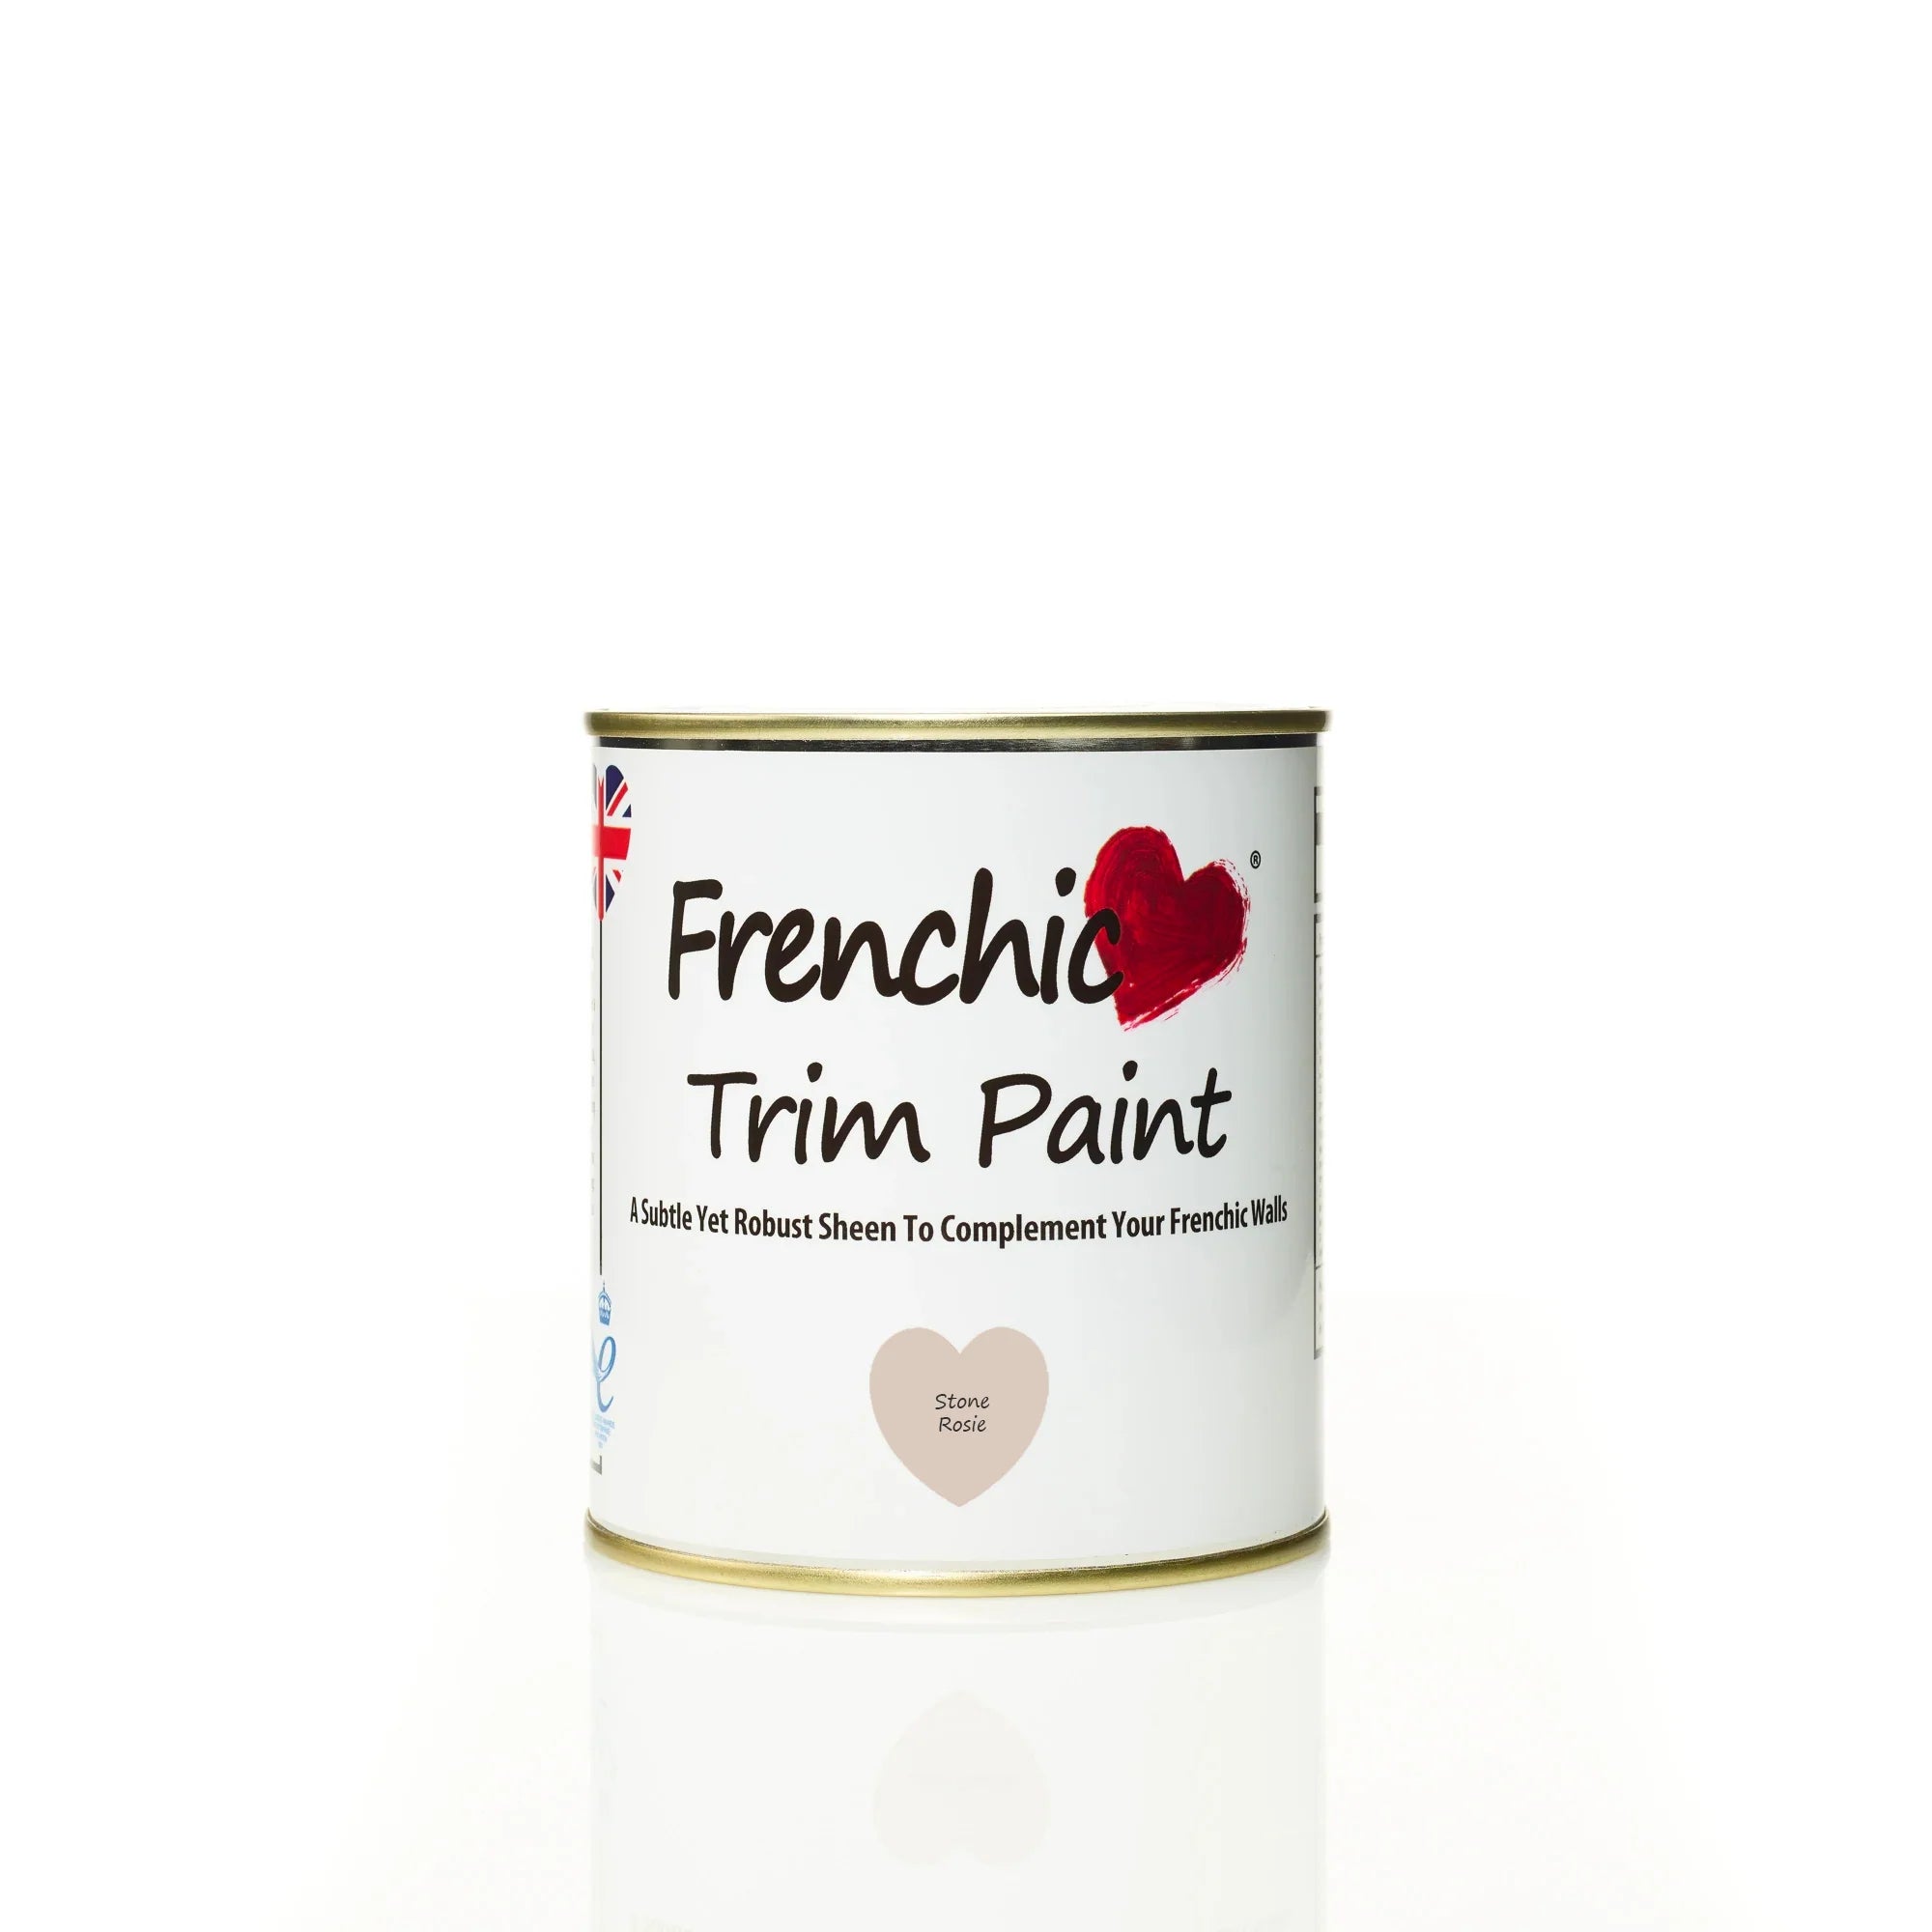 Frenchic Paint Stone Rosie Trim Paint Frenchic Paint Trim Paint Range by Weirs of Baggot Street Irelands Largest and most Trusted Stockist of Frenchic Paint. Shop online for Nationwide and Same Day Dublin Delivery